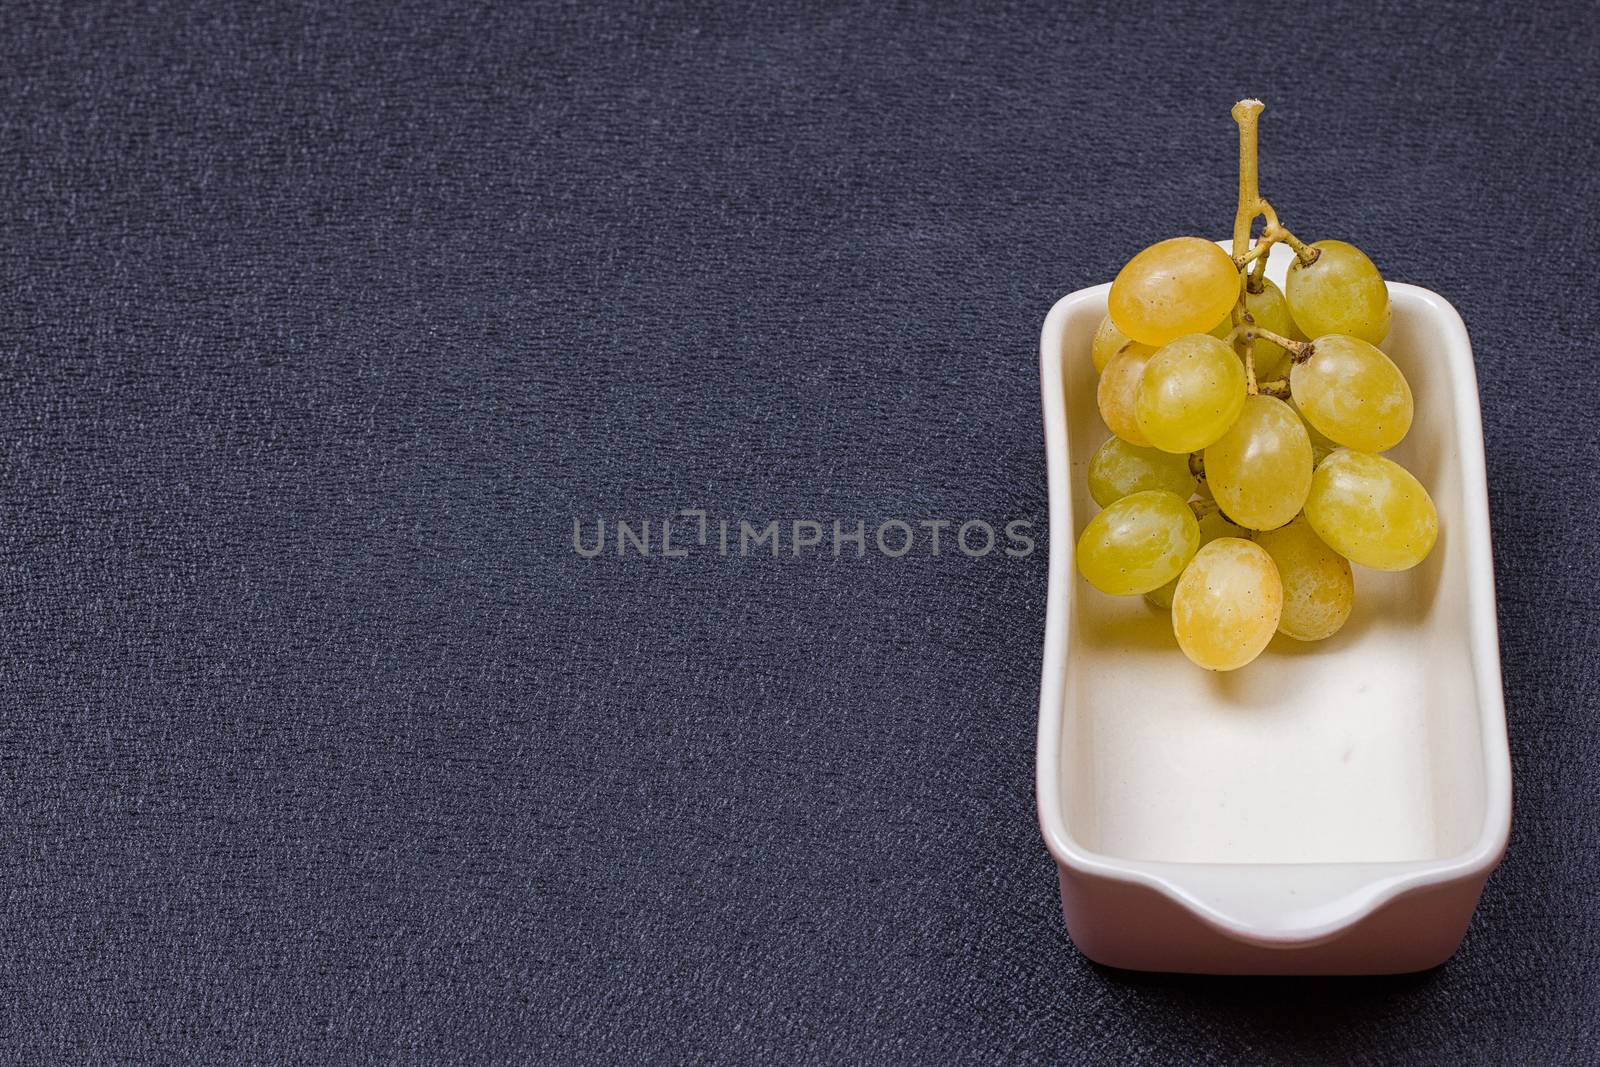 White grapes in a bowl on a black background.copy-space